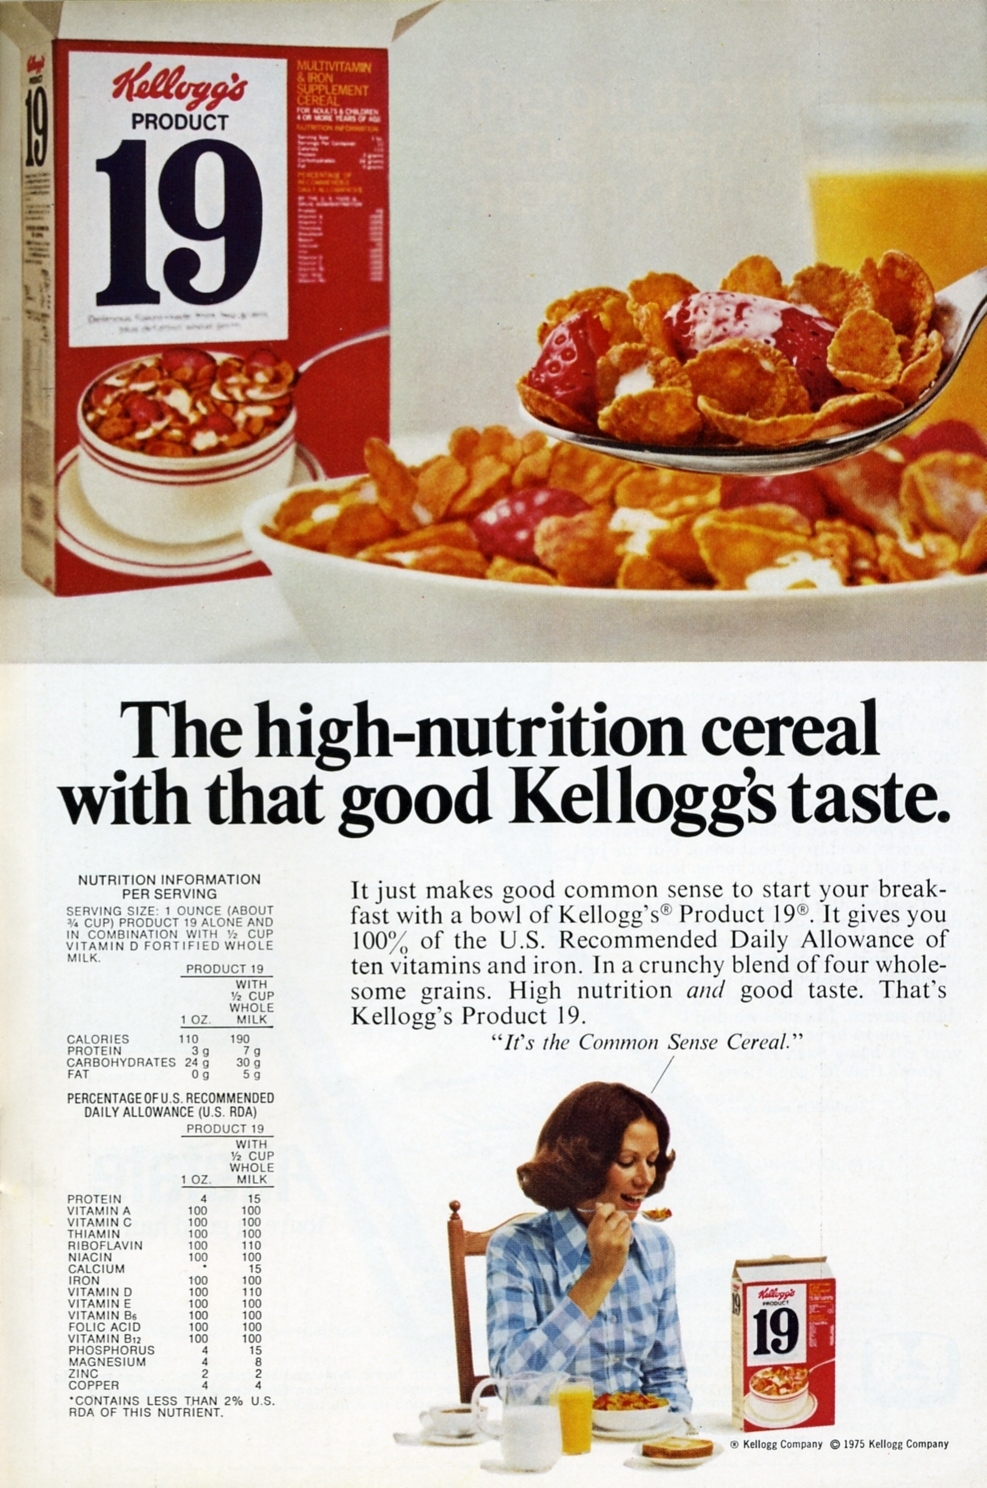 the advertit shows a woman sitting at a table with breakfast food and cereal